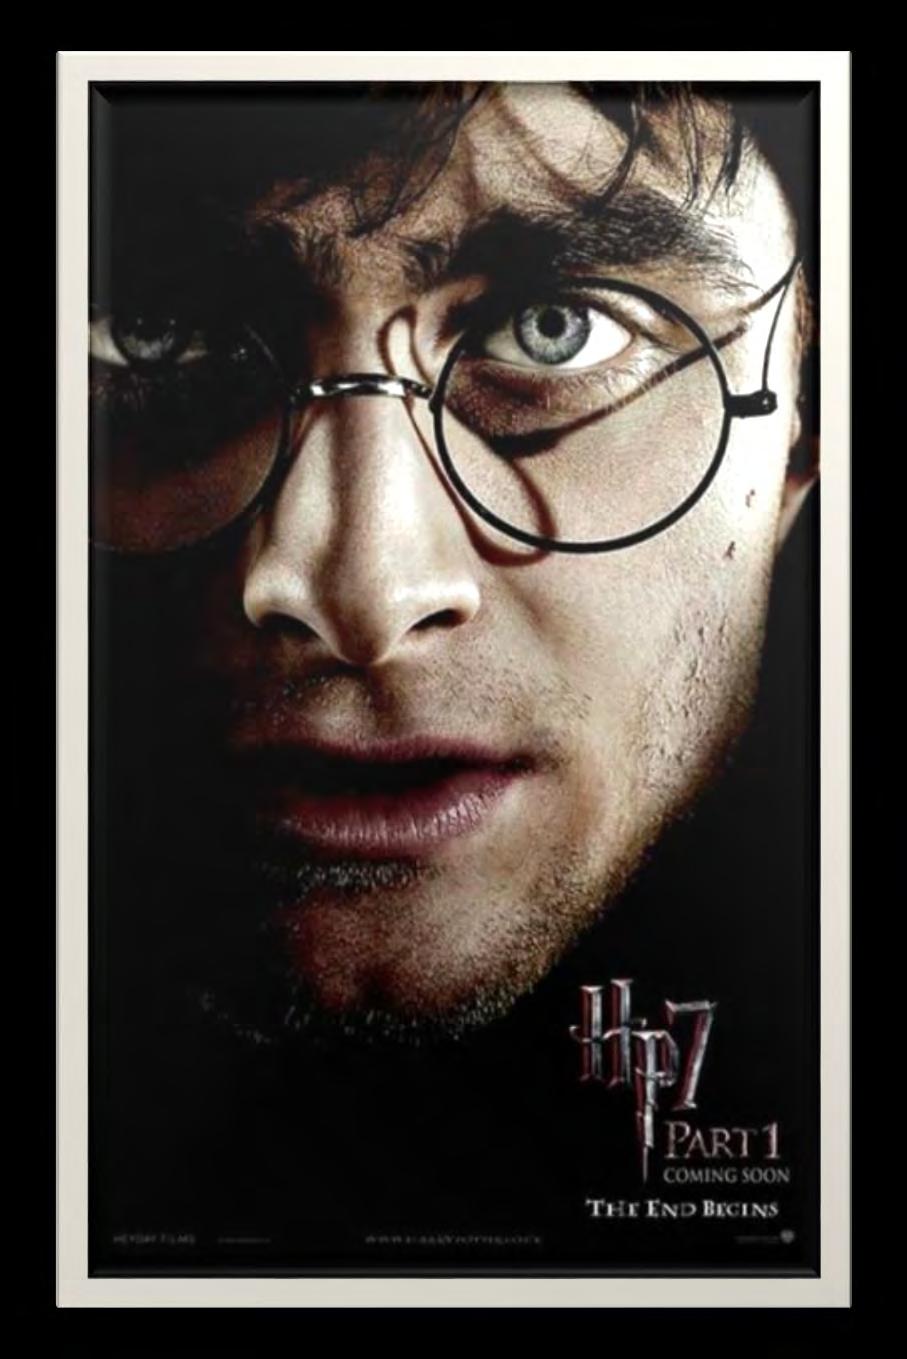 The Teaser Poster 1 This poster shows the picture of Harry Potter; it will be instantly recognised by fans of the genre.